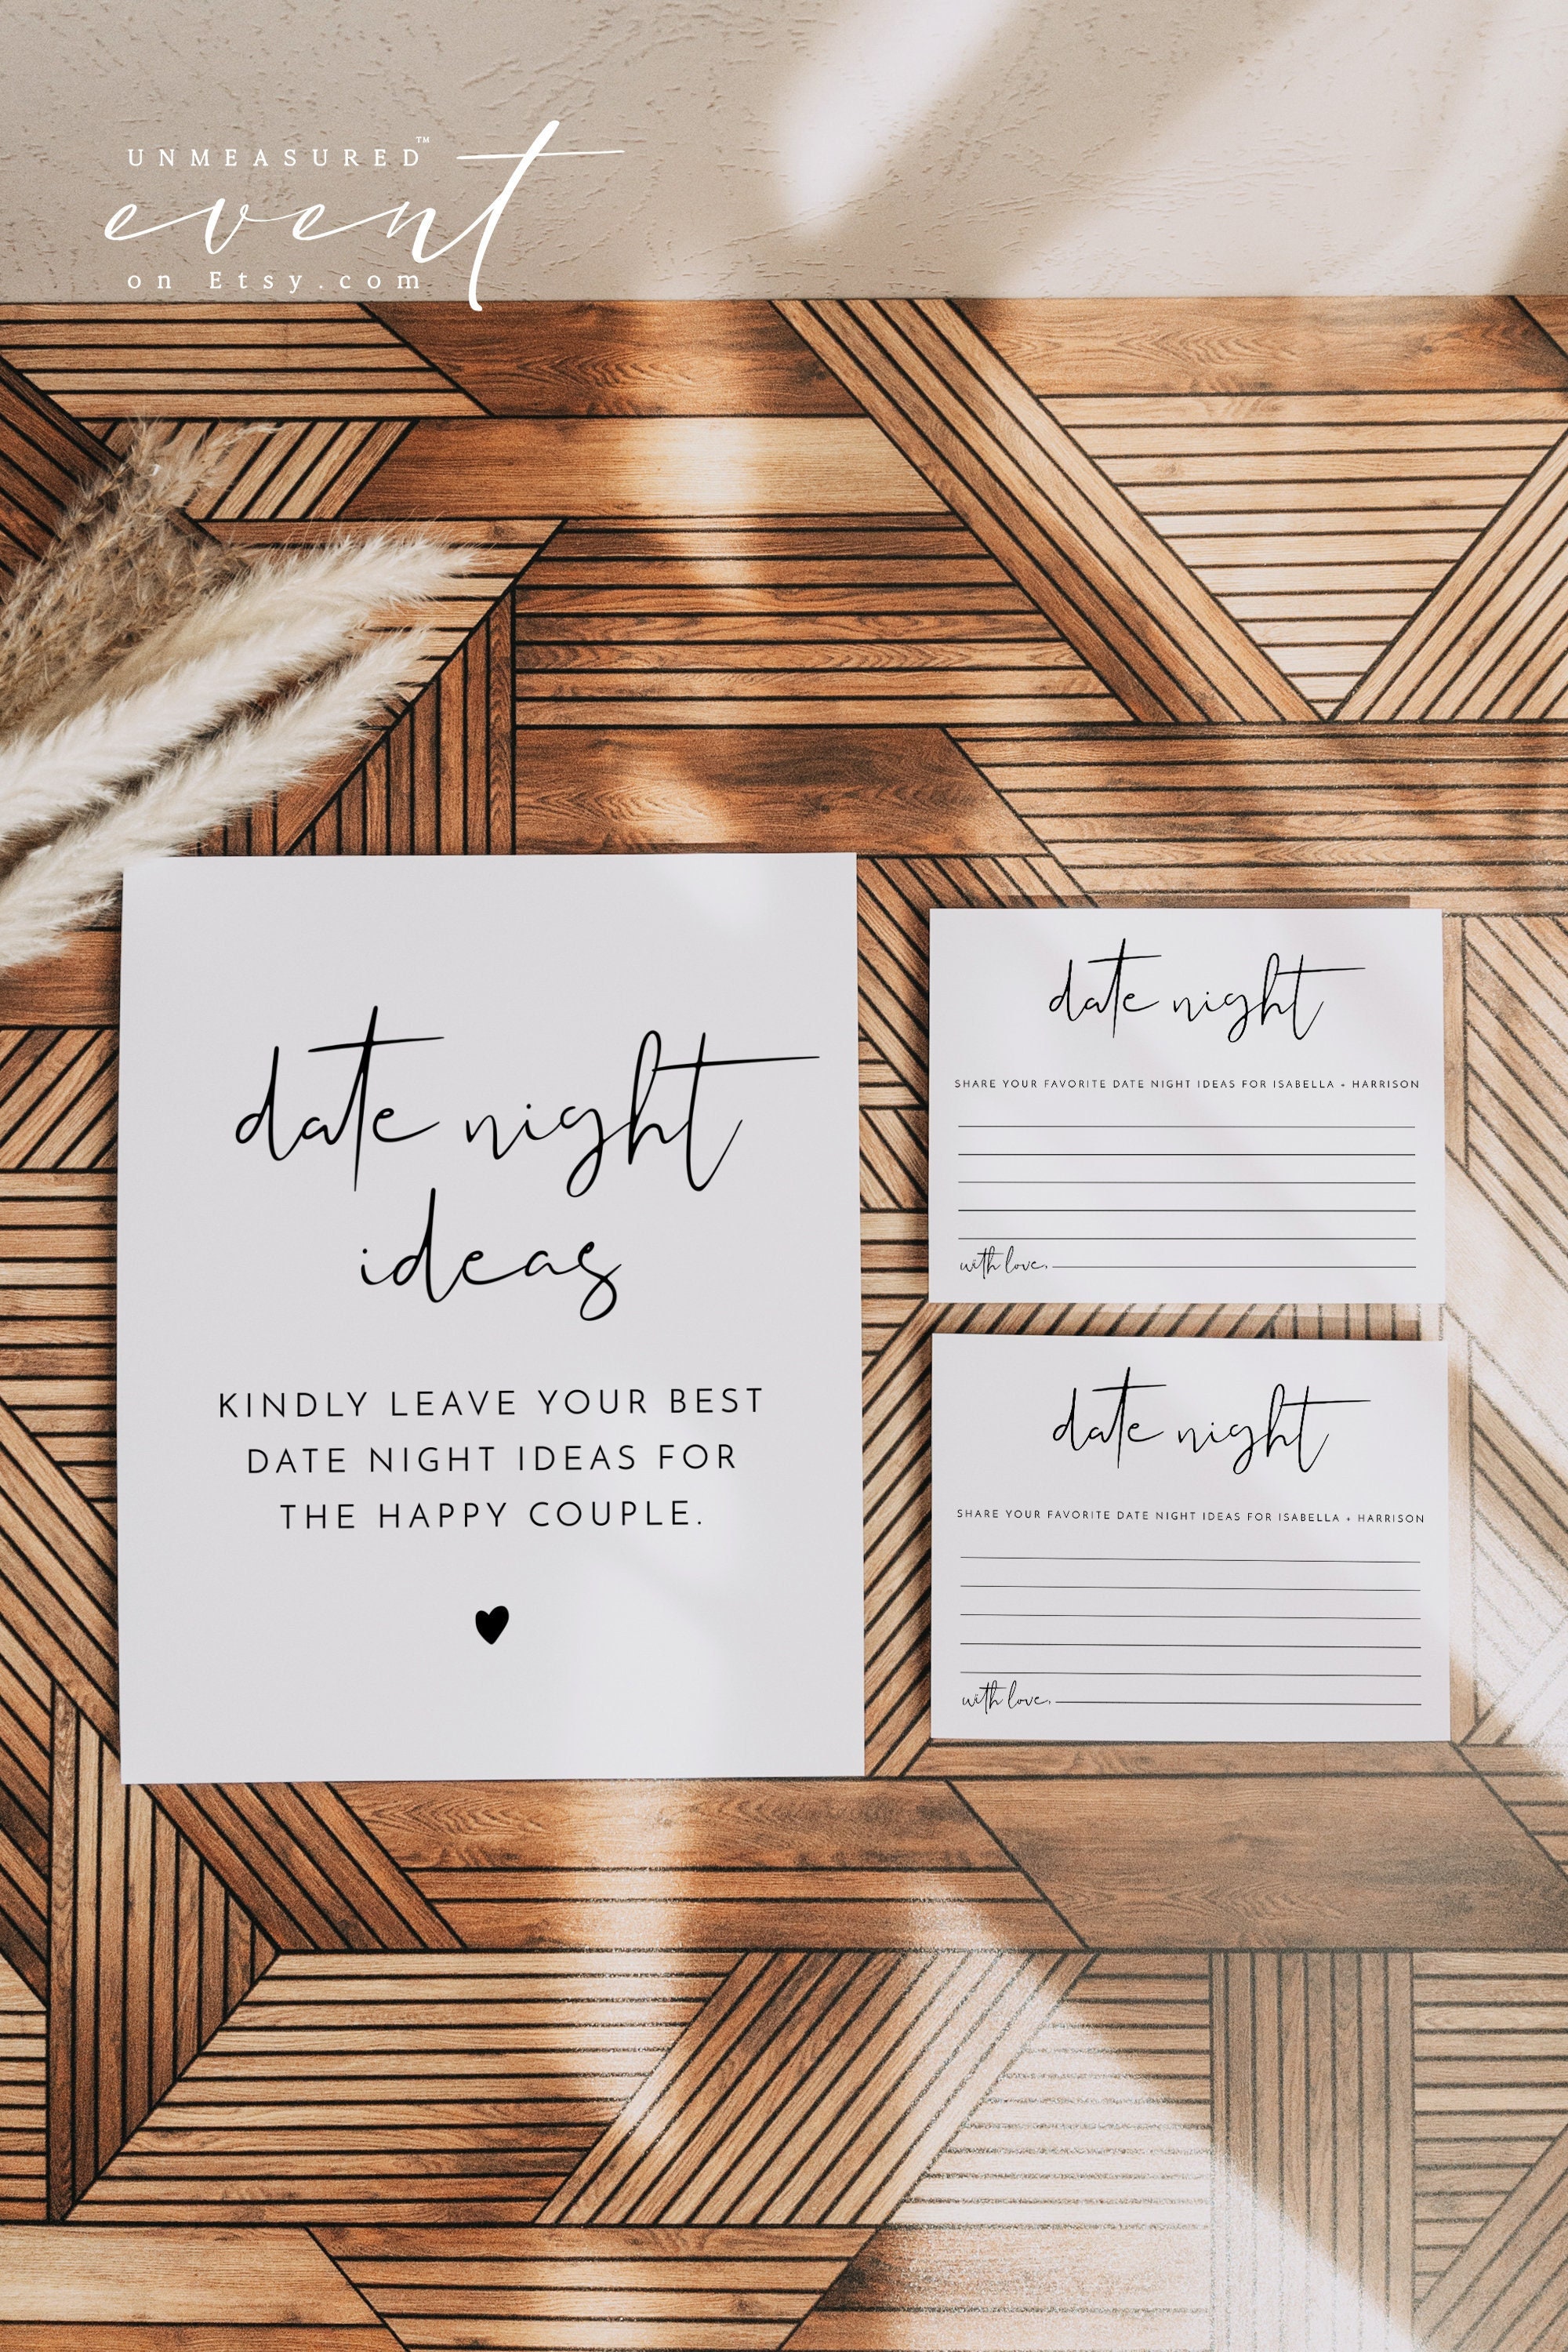 40 Date Ideas for Couples Date Night - Unique Scratch Off Date Night Games  for Couples with Adventure Photo Album Book, Romantic Newlywed and Wedding